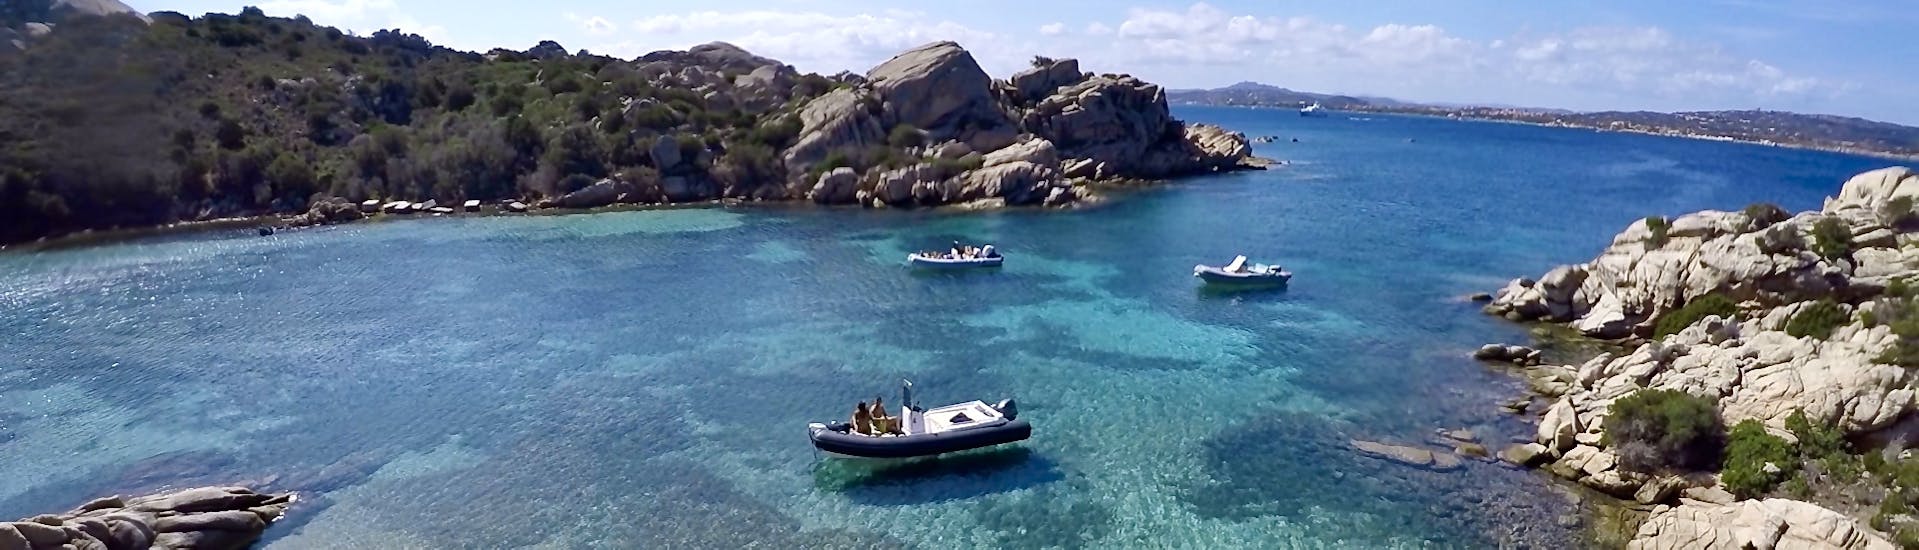 One of our RIB boats is navigating in the emerald waters of the La Maddalena Archipelago during a RIB Boat Rental in Cannigione and Baja Sardinia (up to 6 people) without licence